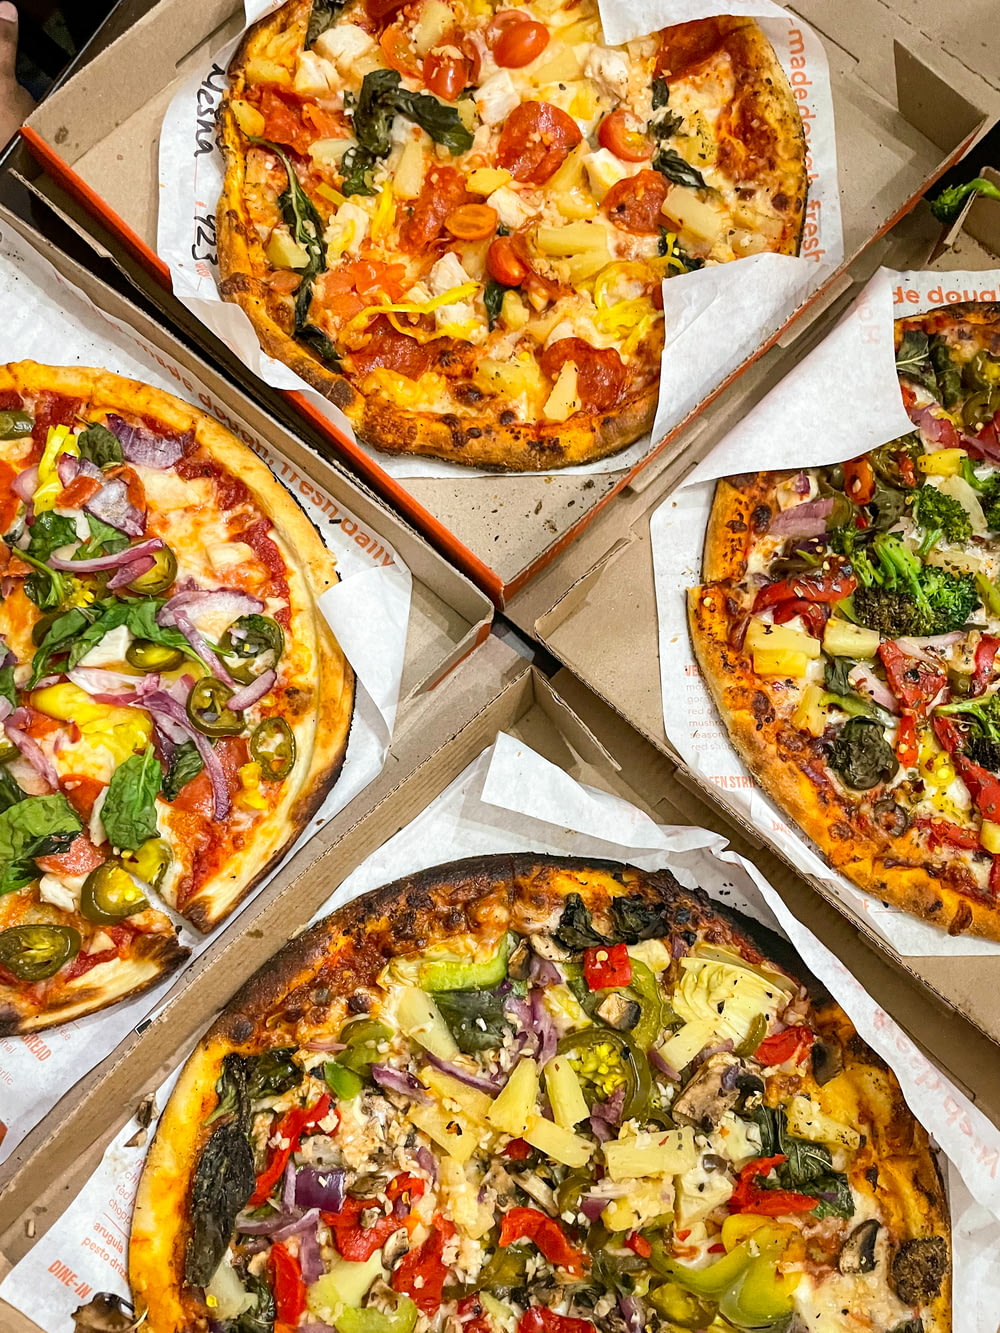 four pizzas with different toppings in a box